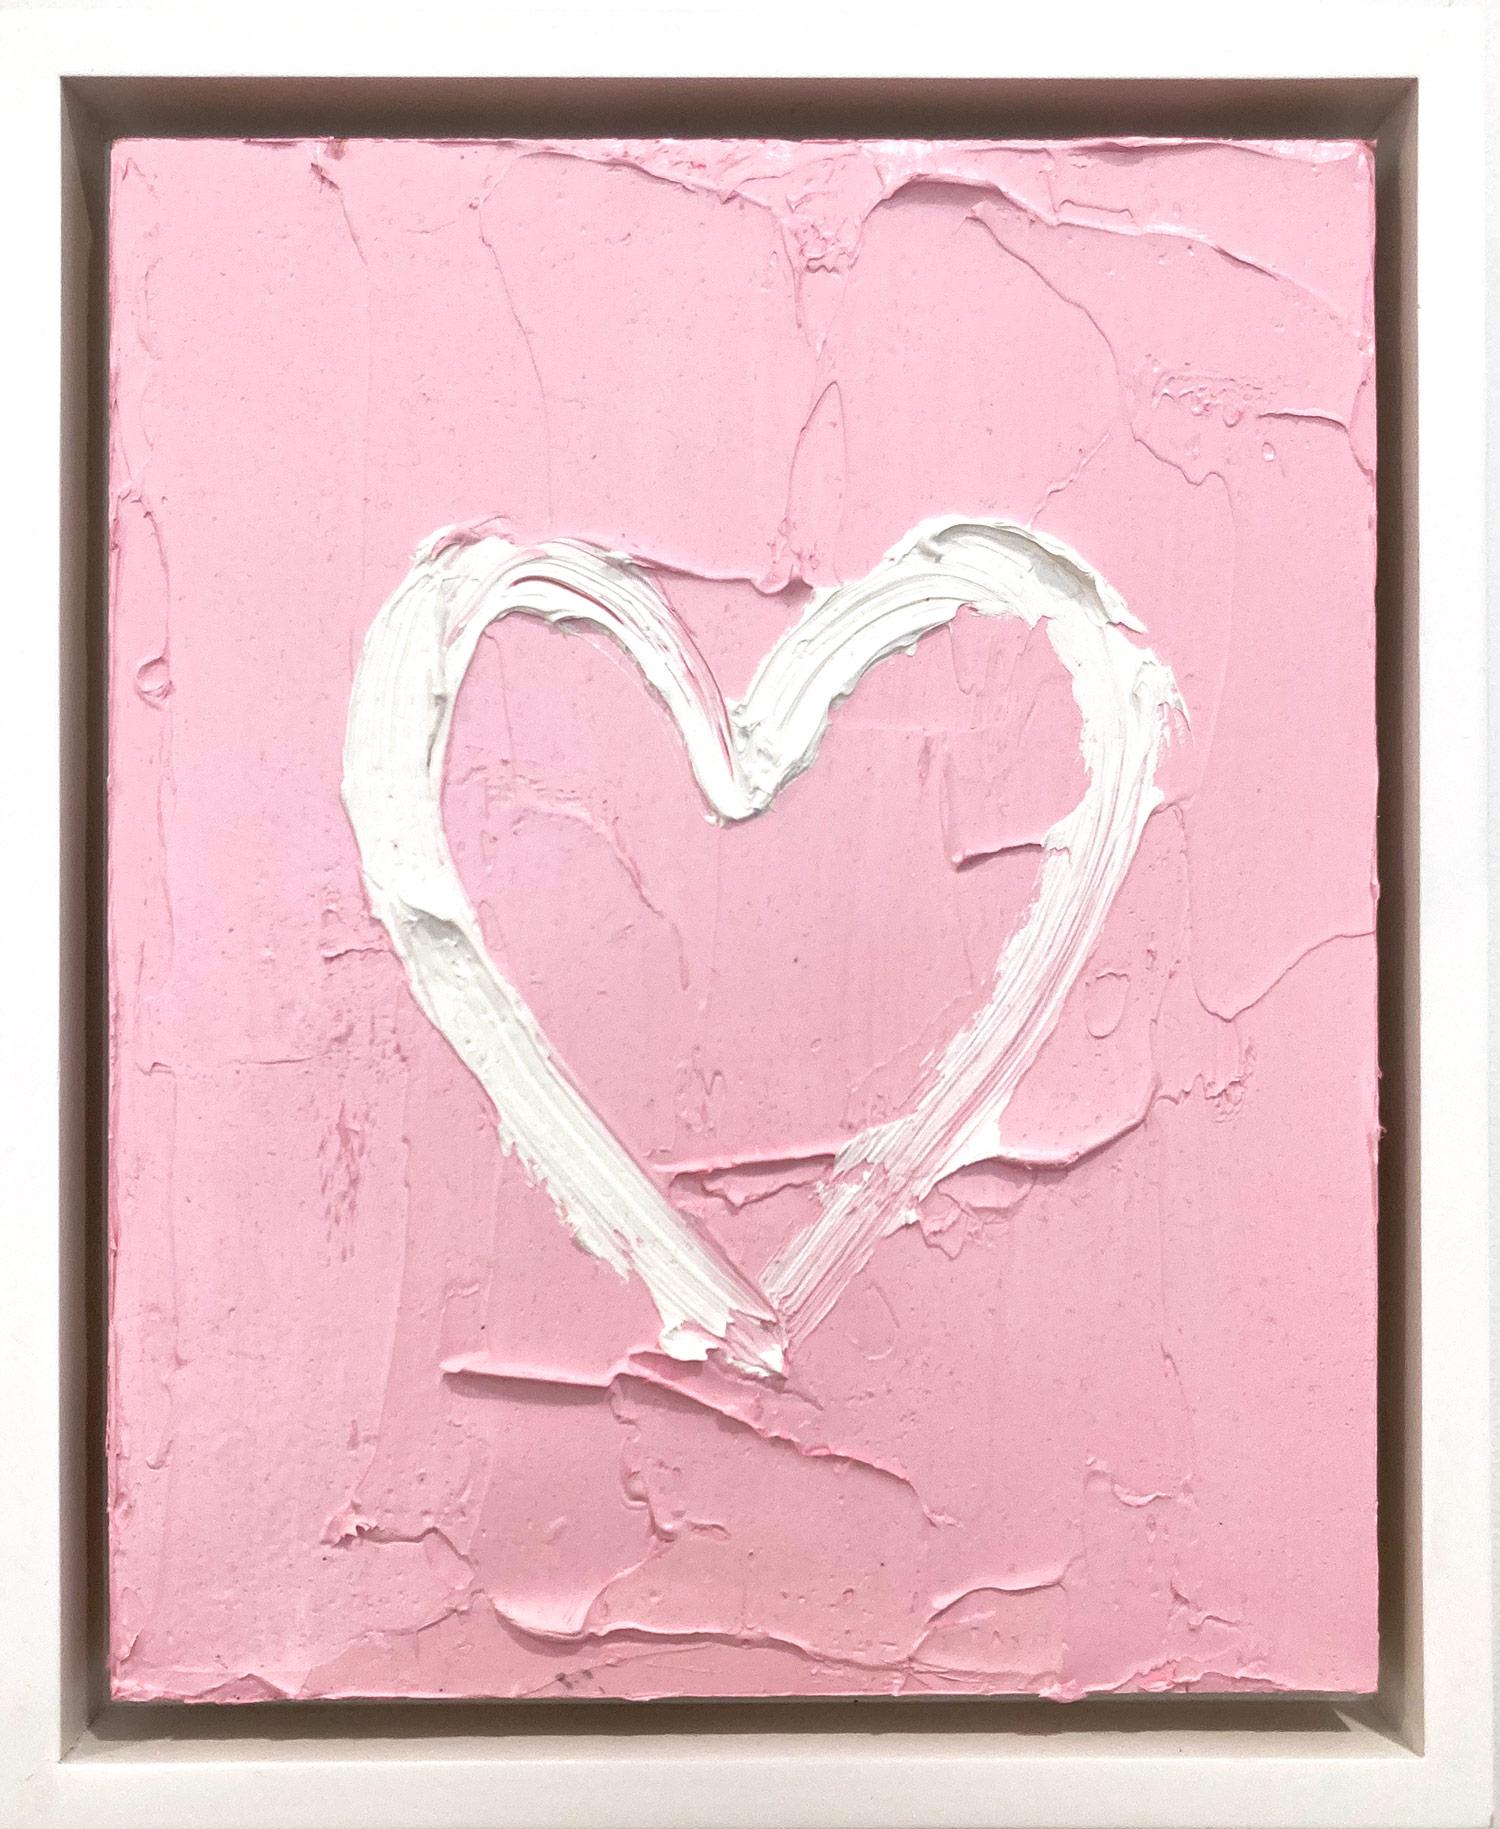 Cindy Shaoul Figurative Painting - "My Cherry Blossom Heart" Light Pink Contemporary Oil Painting w Floater Frame